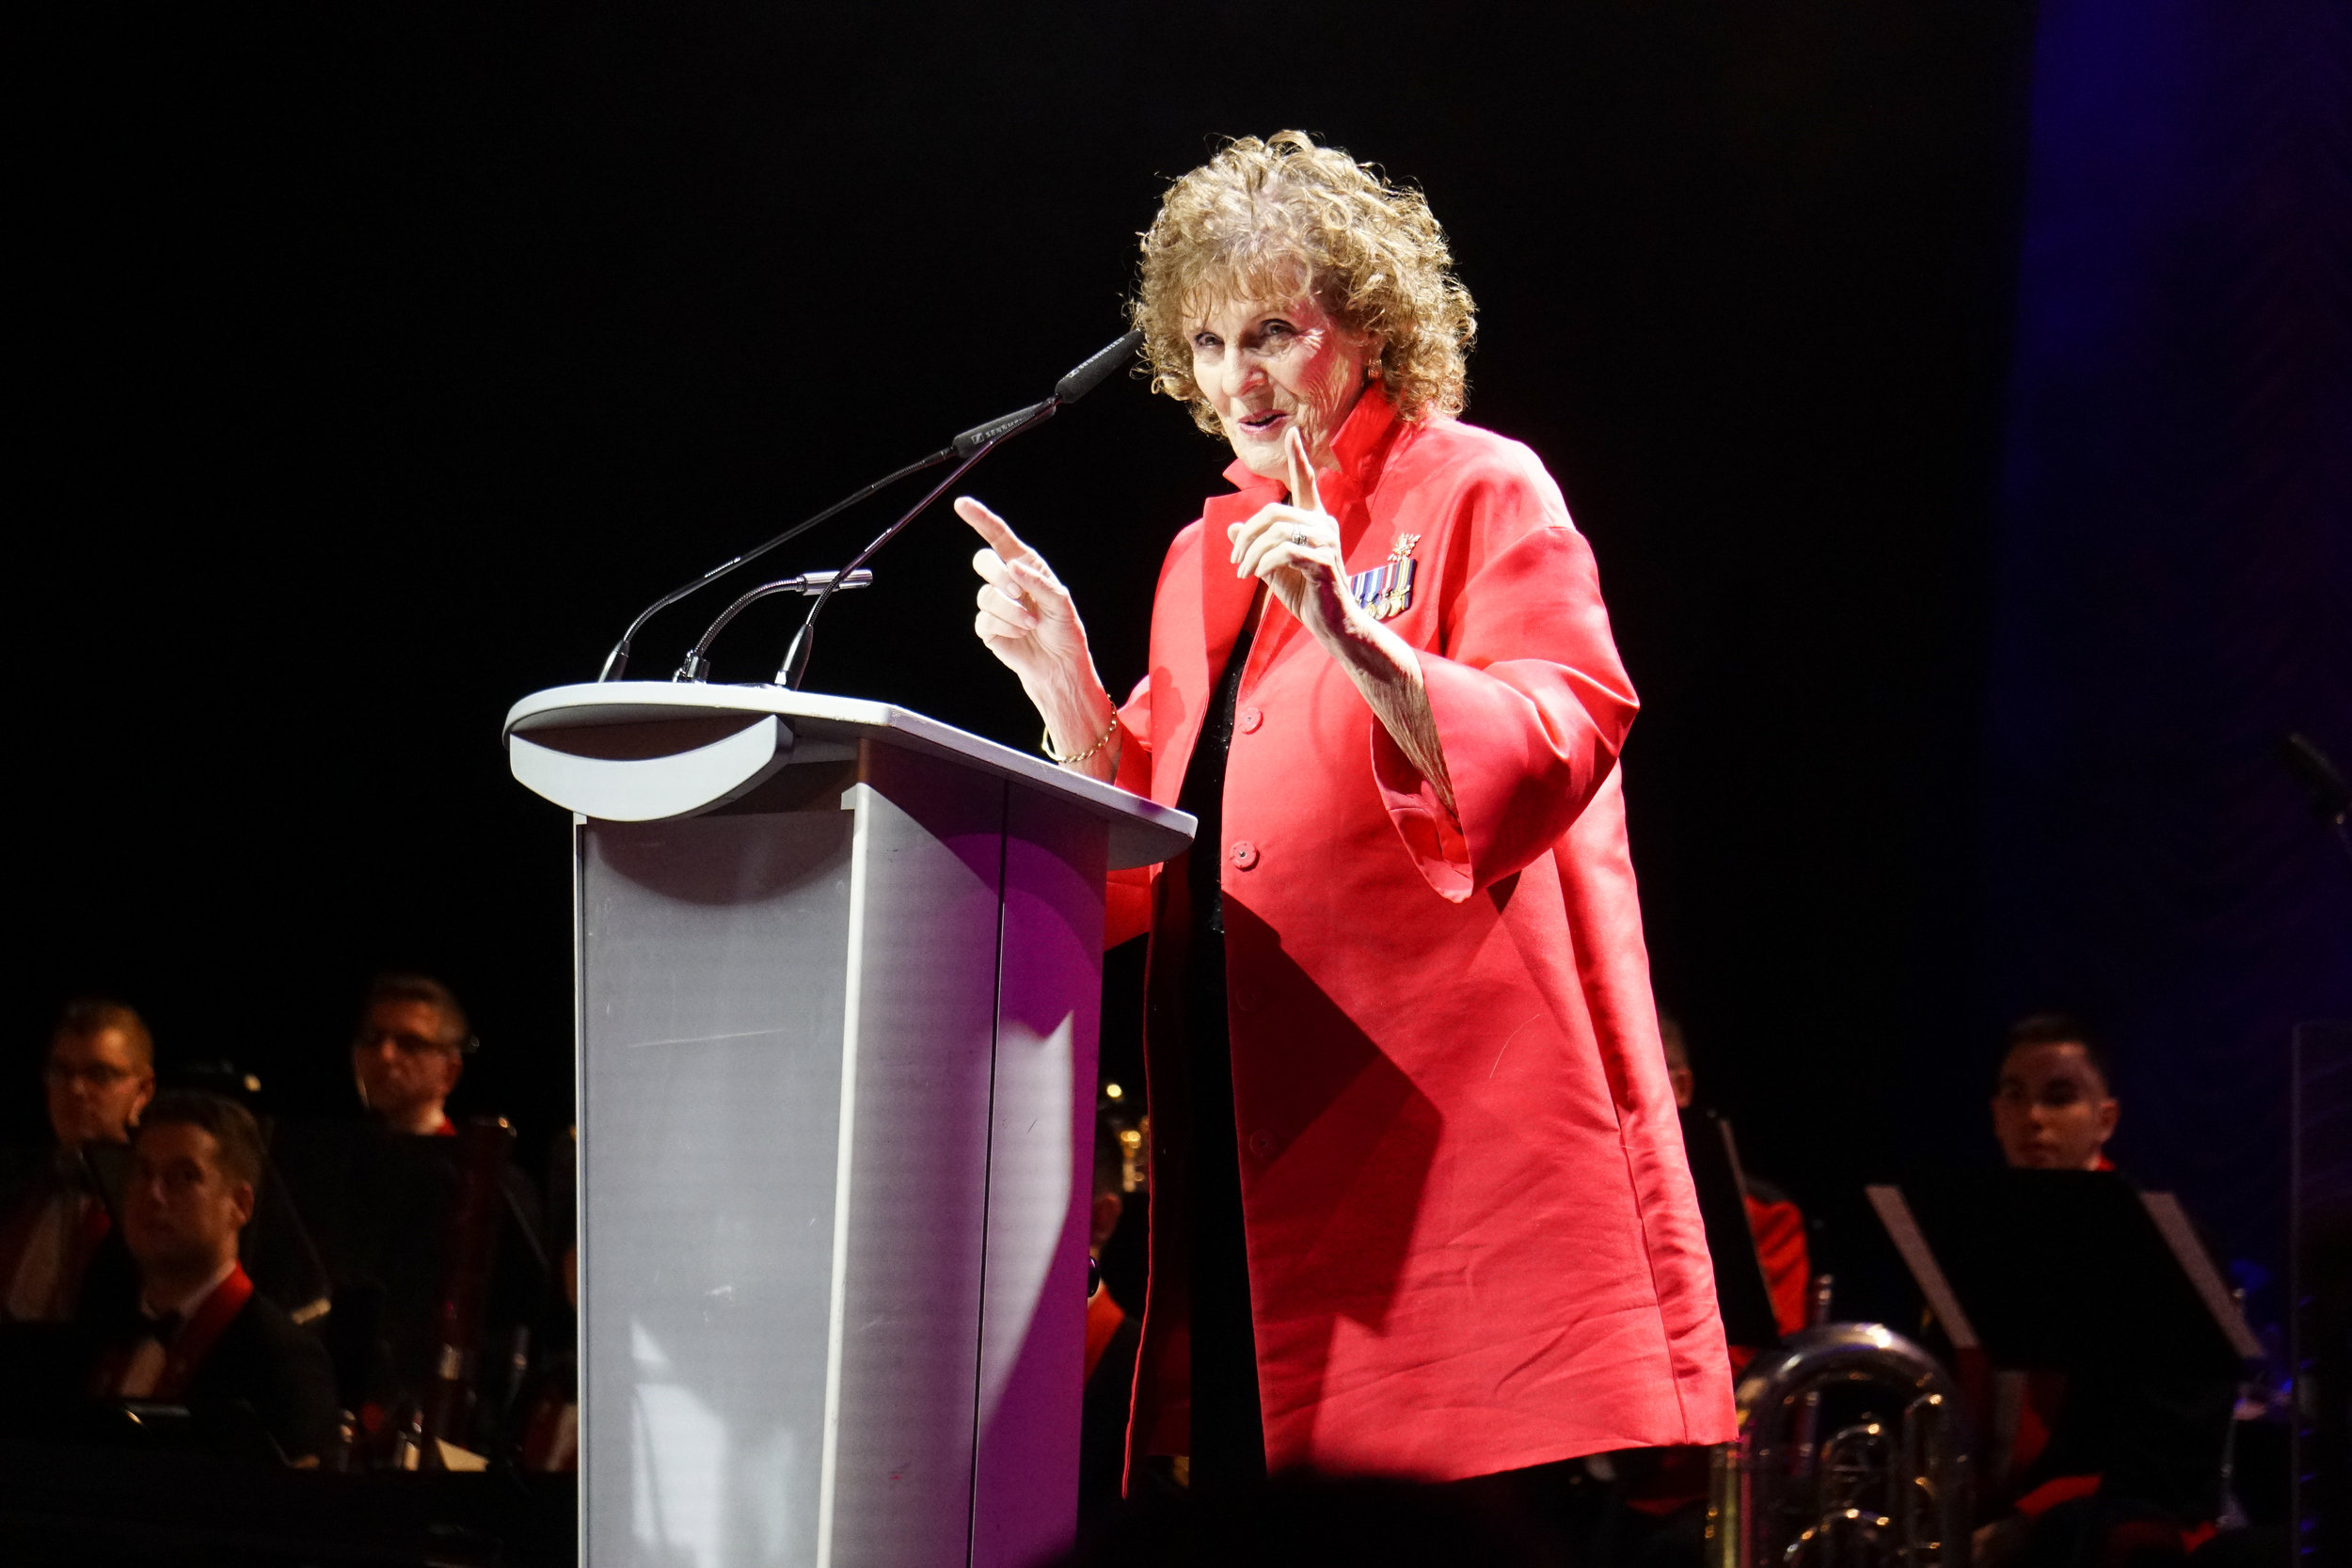 The Honourable Lois E. Mitchell, Lieutenant Governor of Alberta, shares how opera can inspire innovation